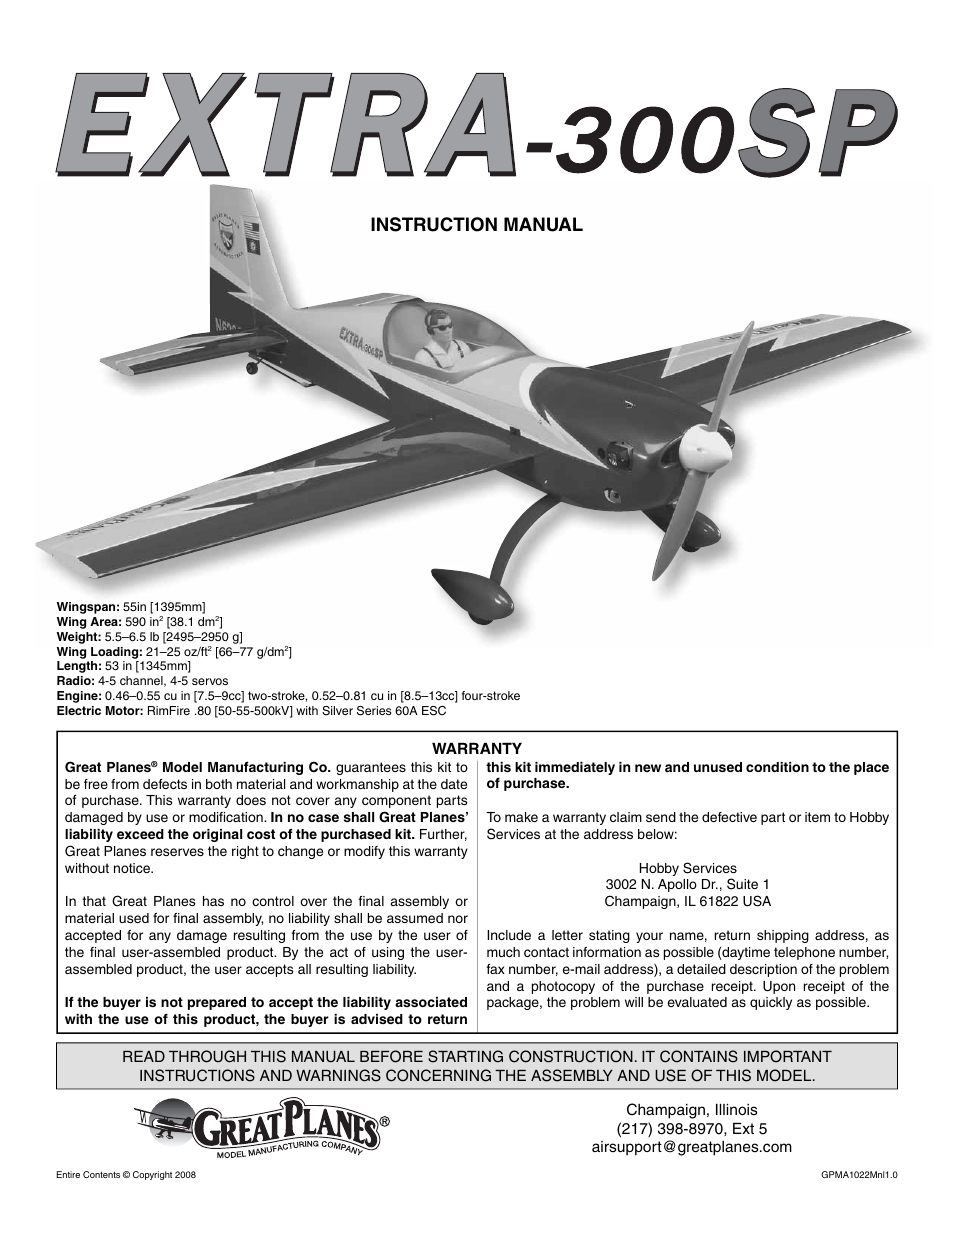 Details about   Great Planes Extra 300S 40 Instruction Build Owners Manual Sport Scale EXT4P03 